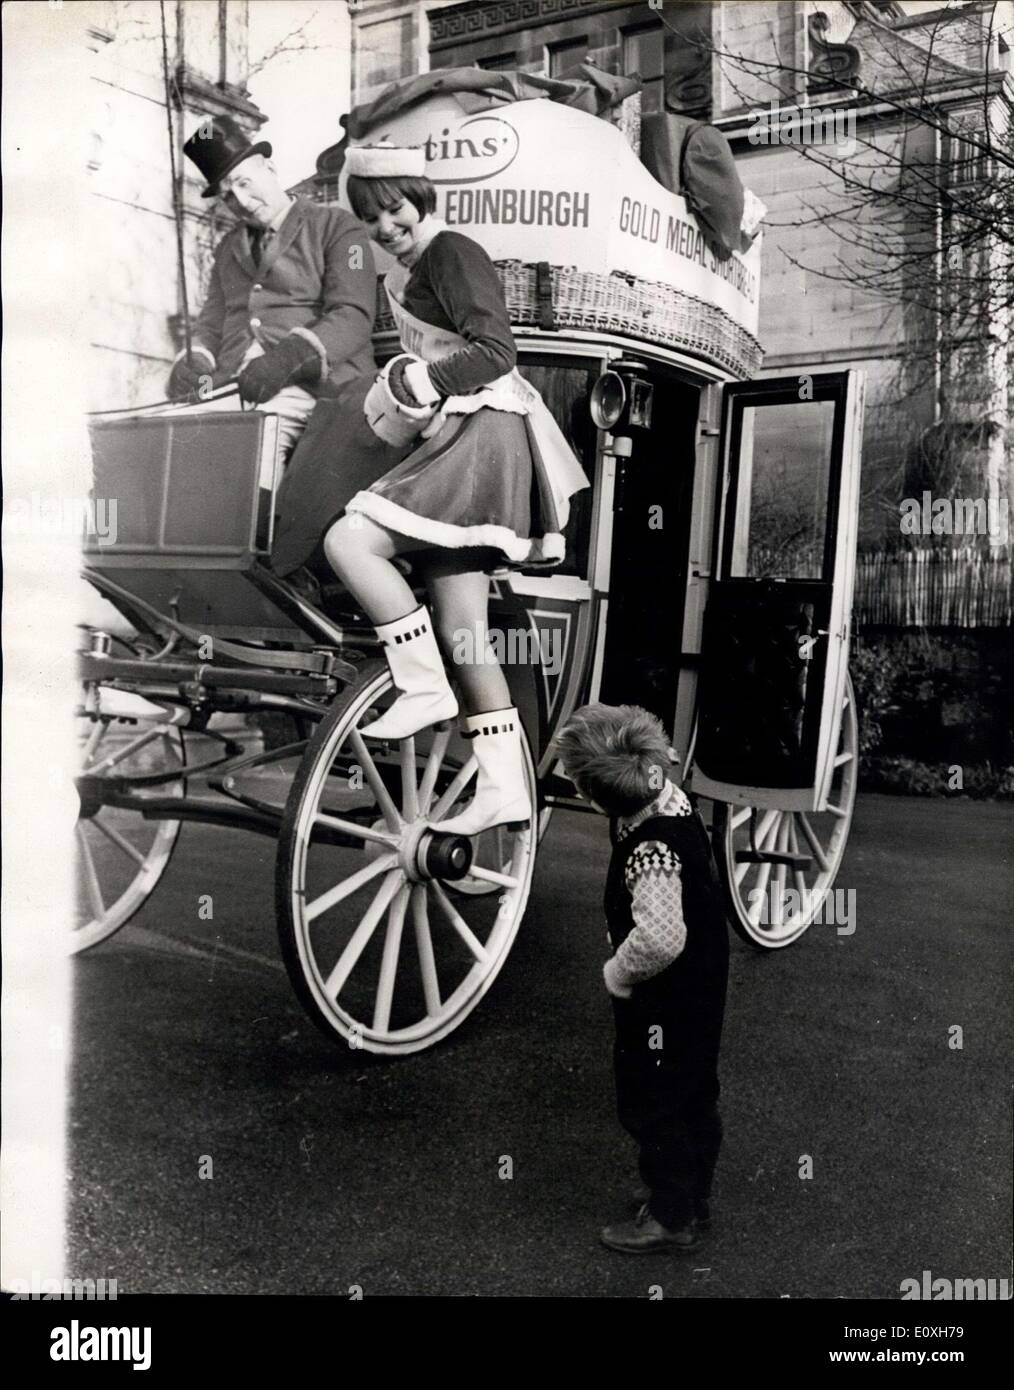 Dec. 23, 1966 - Stage Coach For Miss Santa Claus: Complete with her red and white mini-skirt, 18-year old Janette McGrouther, of Edinburgh, is acting as a Miss Santa Claus this week. She is traveling round children's homes in a horse drawn stage coach, handing out Christmas cakes and toys to the children. Her first call was at the Lord and Lady Plwarth Home for children Stock Photo